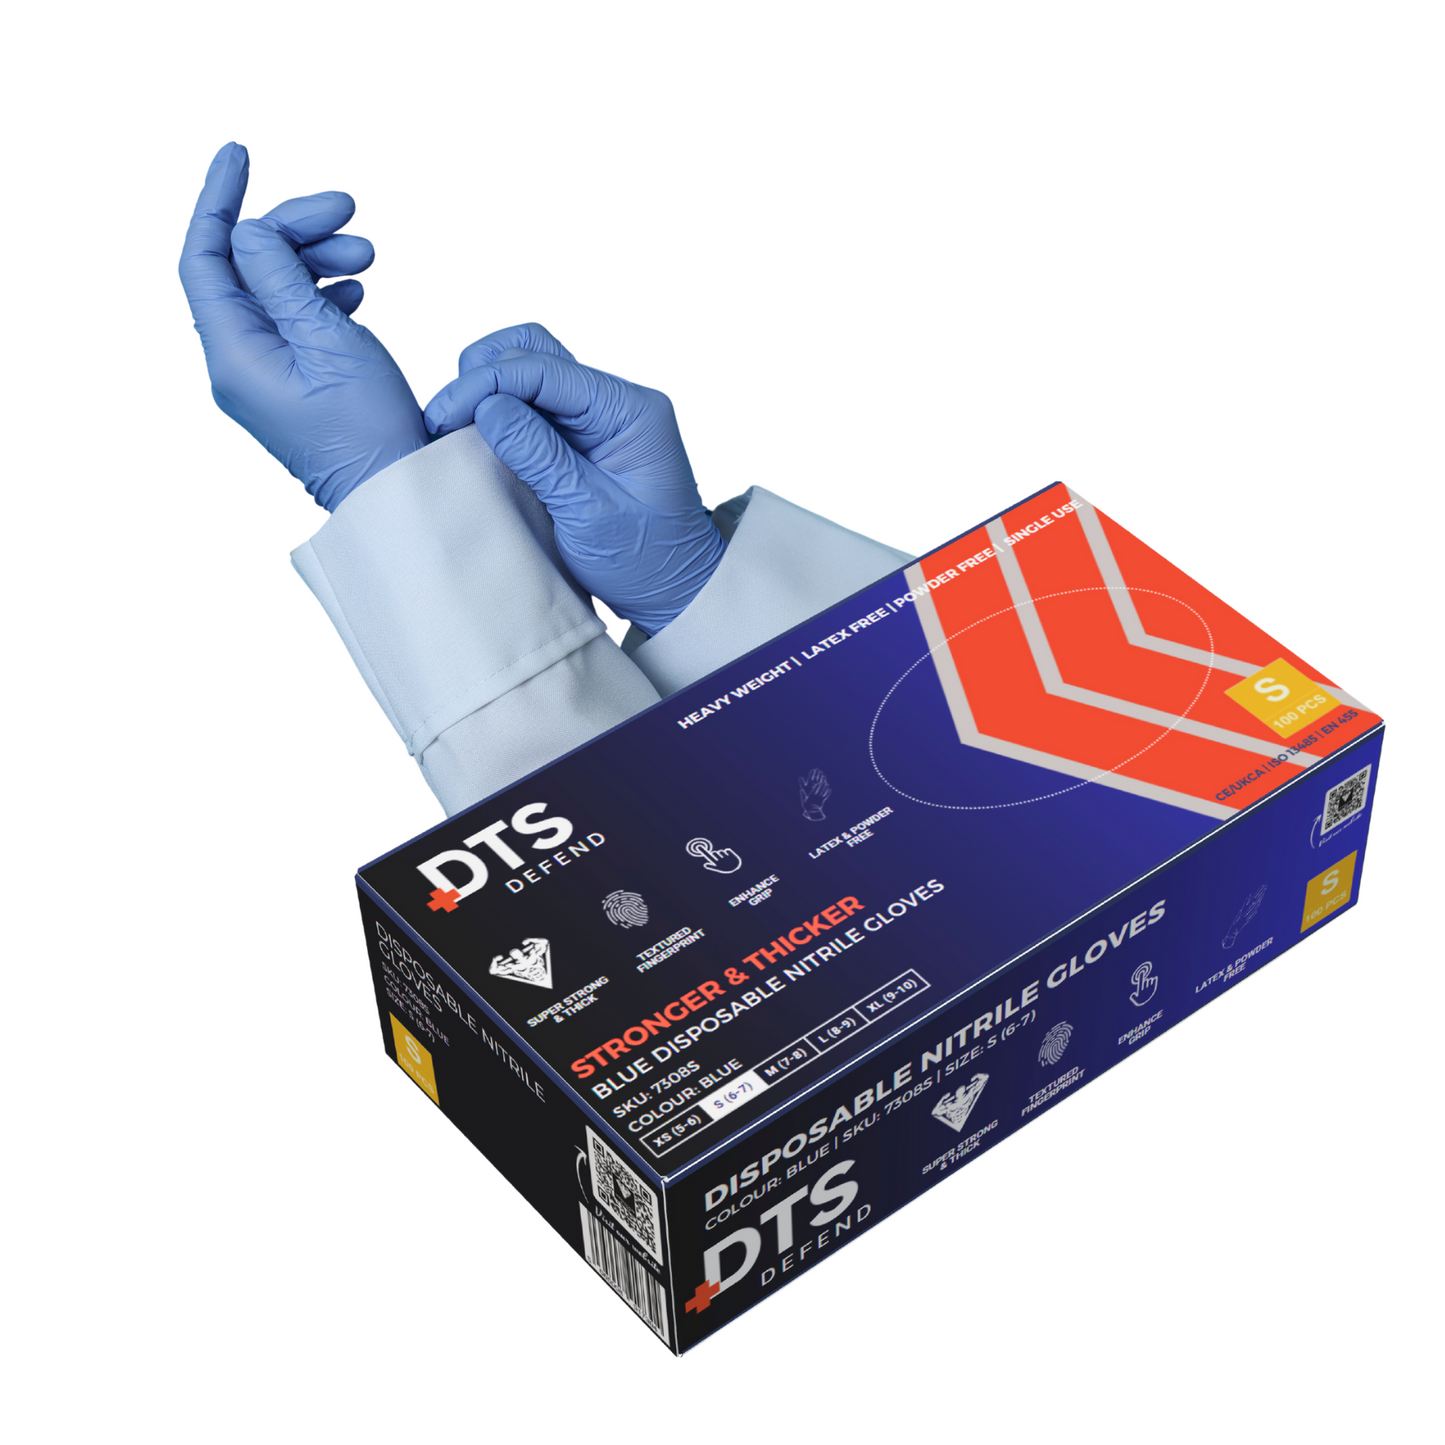 DTS Defend - Stronger & Thicker Disposable Nitrile Gloves, Blue (10x100) CAT III